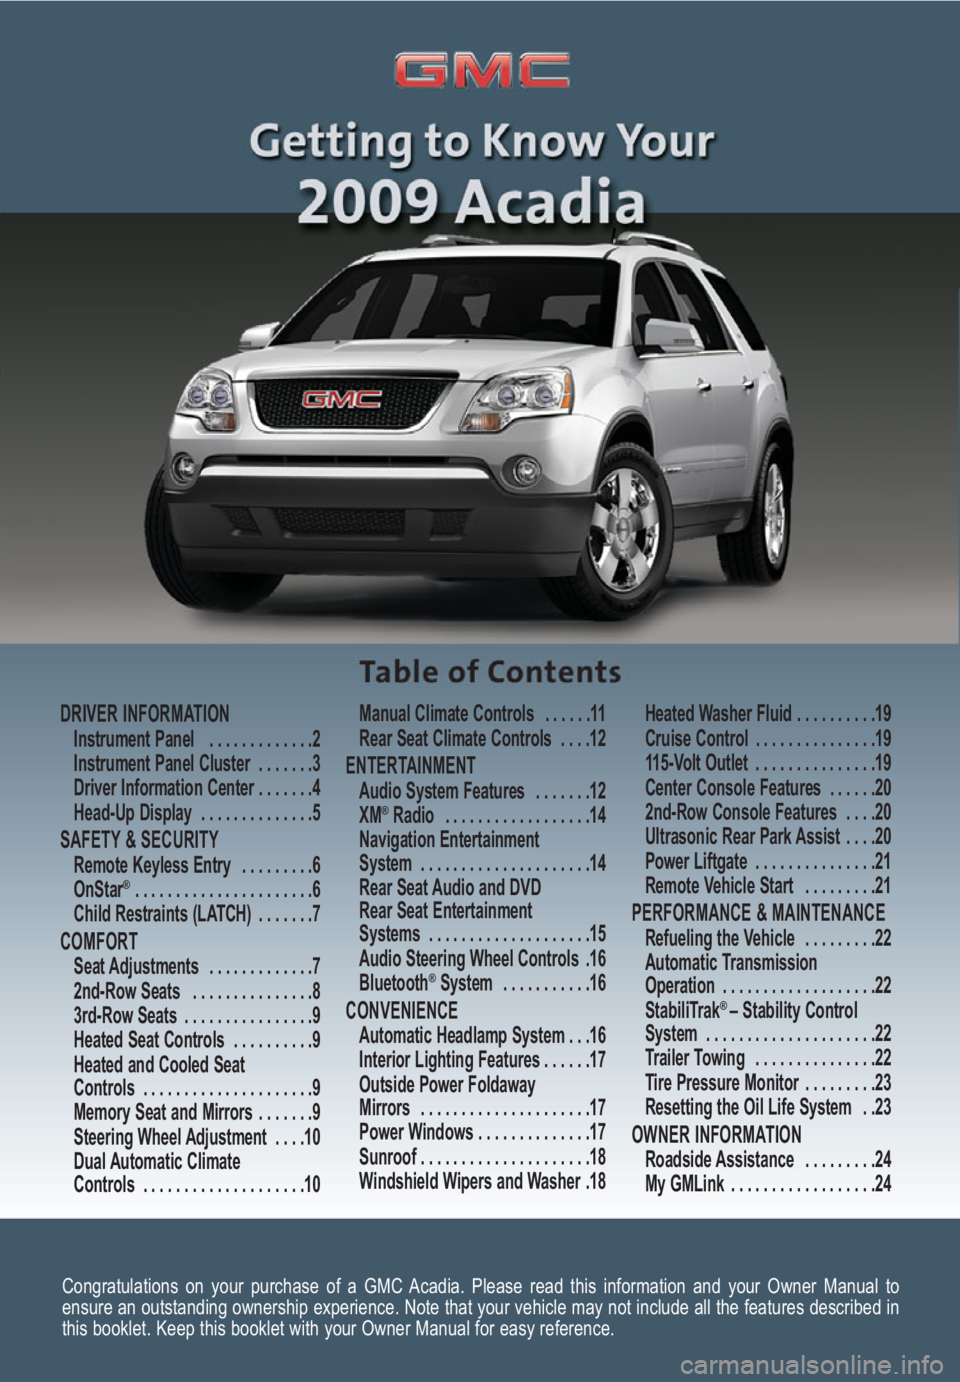 GMC ACADIA 2009  Get To Know Guide Congratulations on your purchase of a GMC Acadia. Please read this information and your Owner Manual to
ensure an outstanding ownership experience. Note that your vehicle may not include all the featu